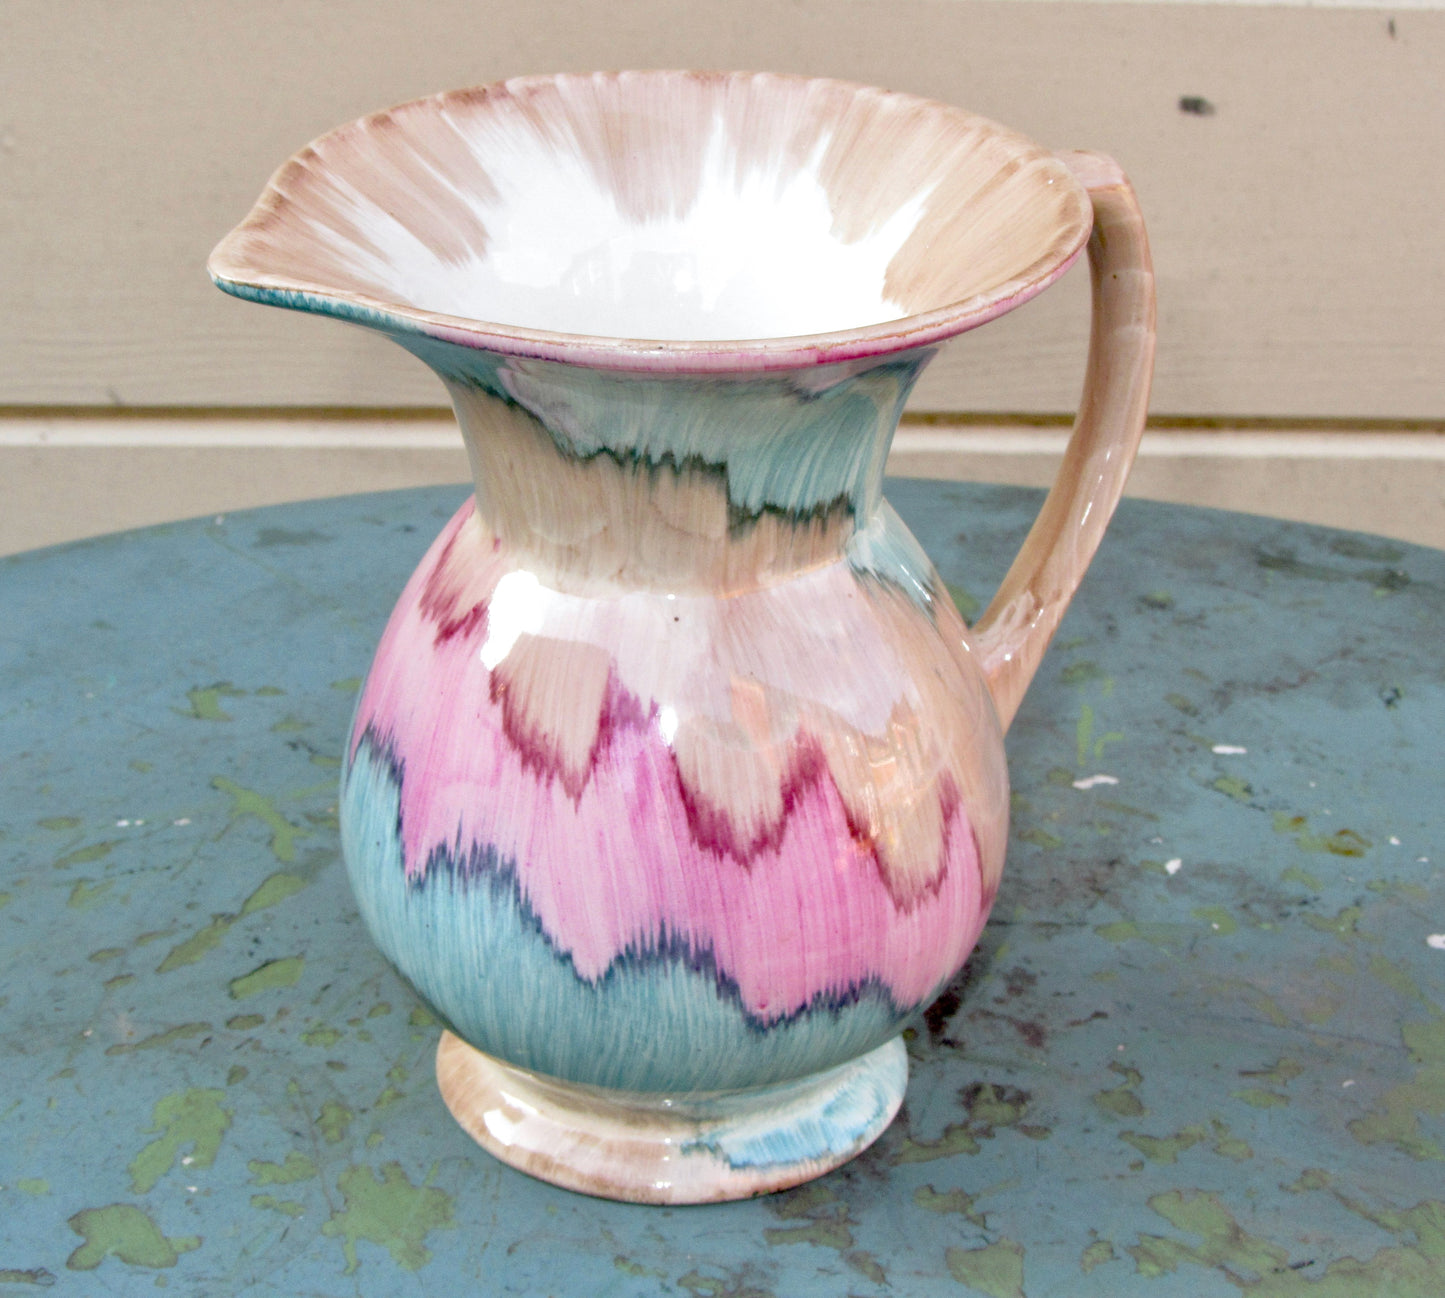 1930s Beswick Pottery Wide Neck Jug/Pitcher Pattern 8094 260/3 In Pastel Shades